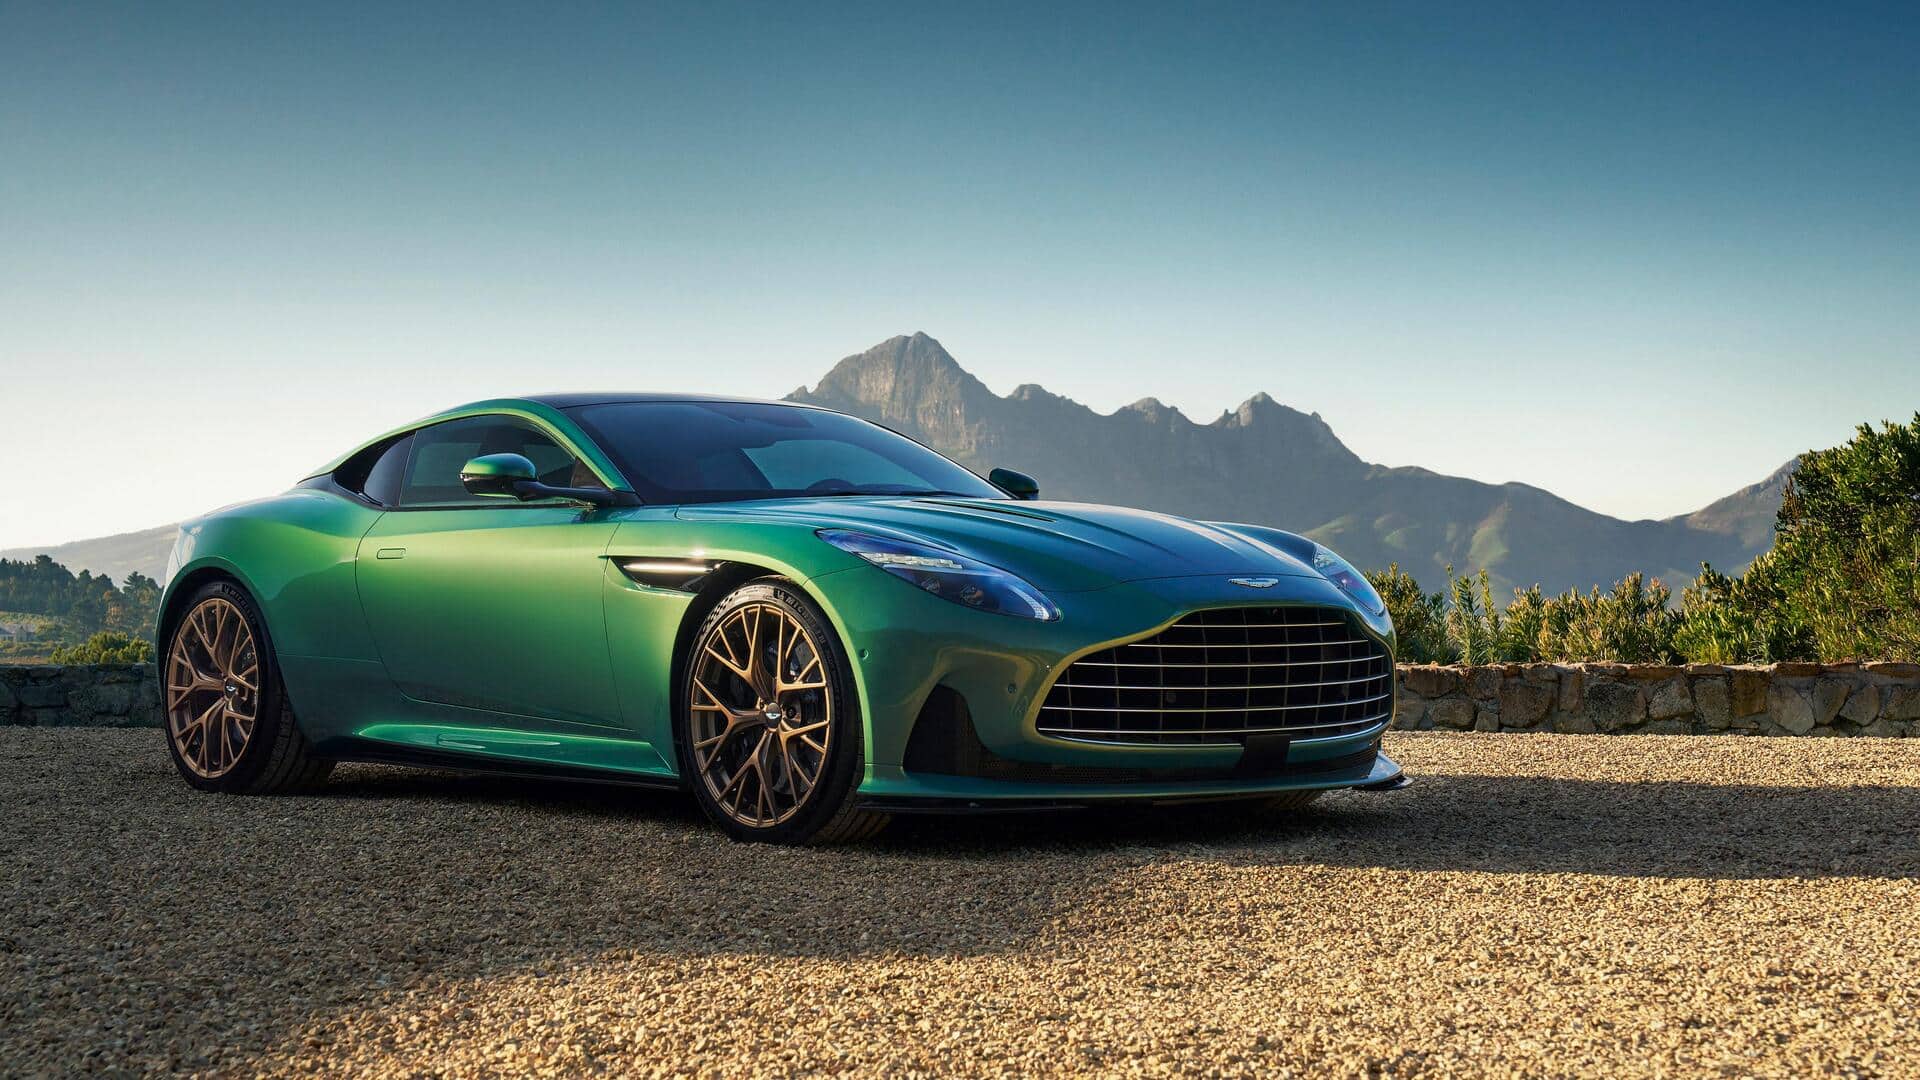 Aston Martin DB12 goes official in India: Check top alternatives